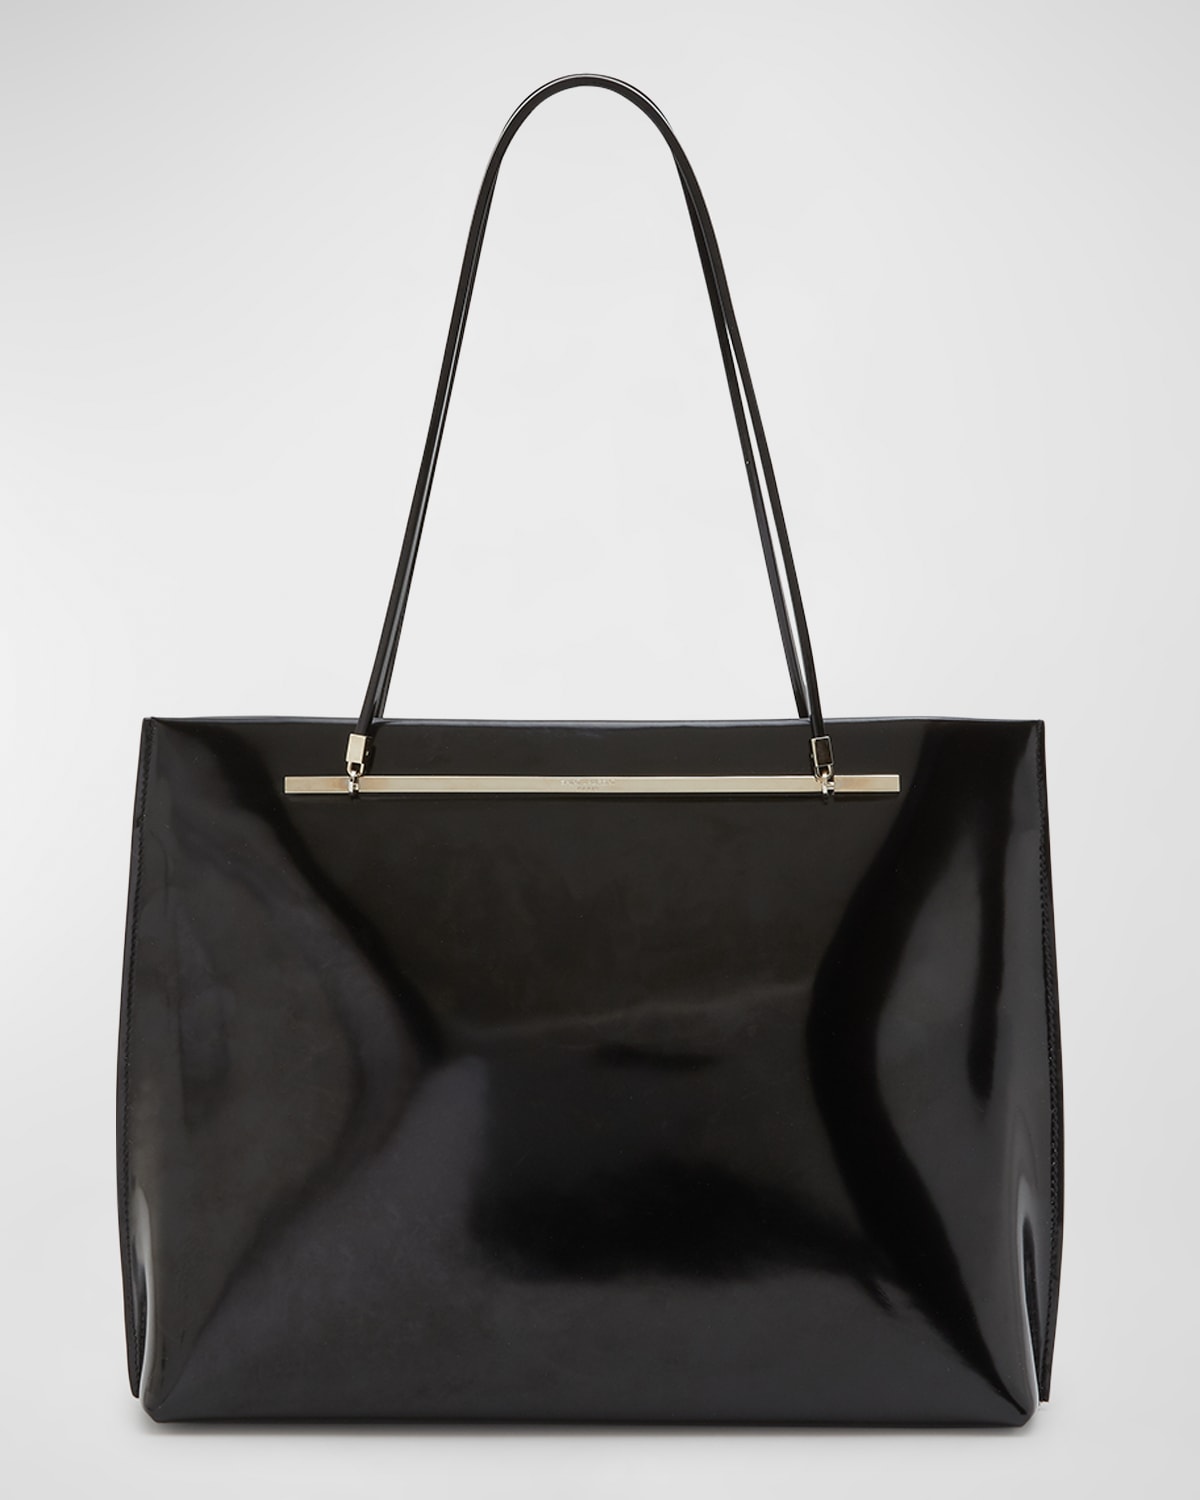 SAINT LAURENT SUZANNE SHOPPING TOTE BAG IN PATENT LEATHER